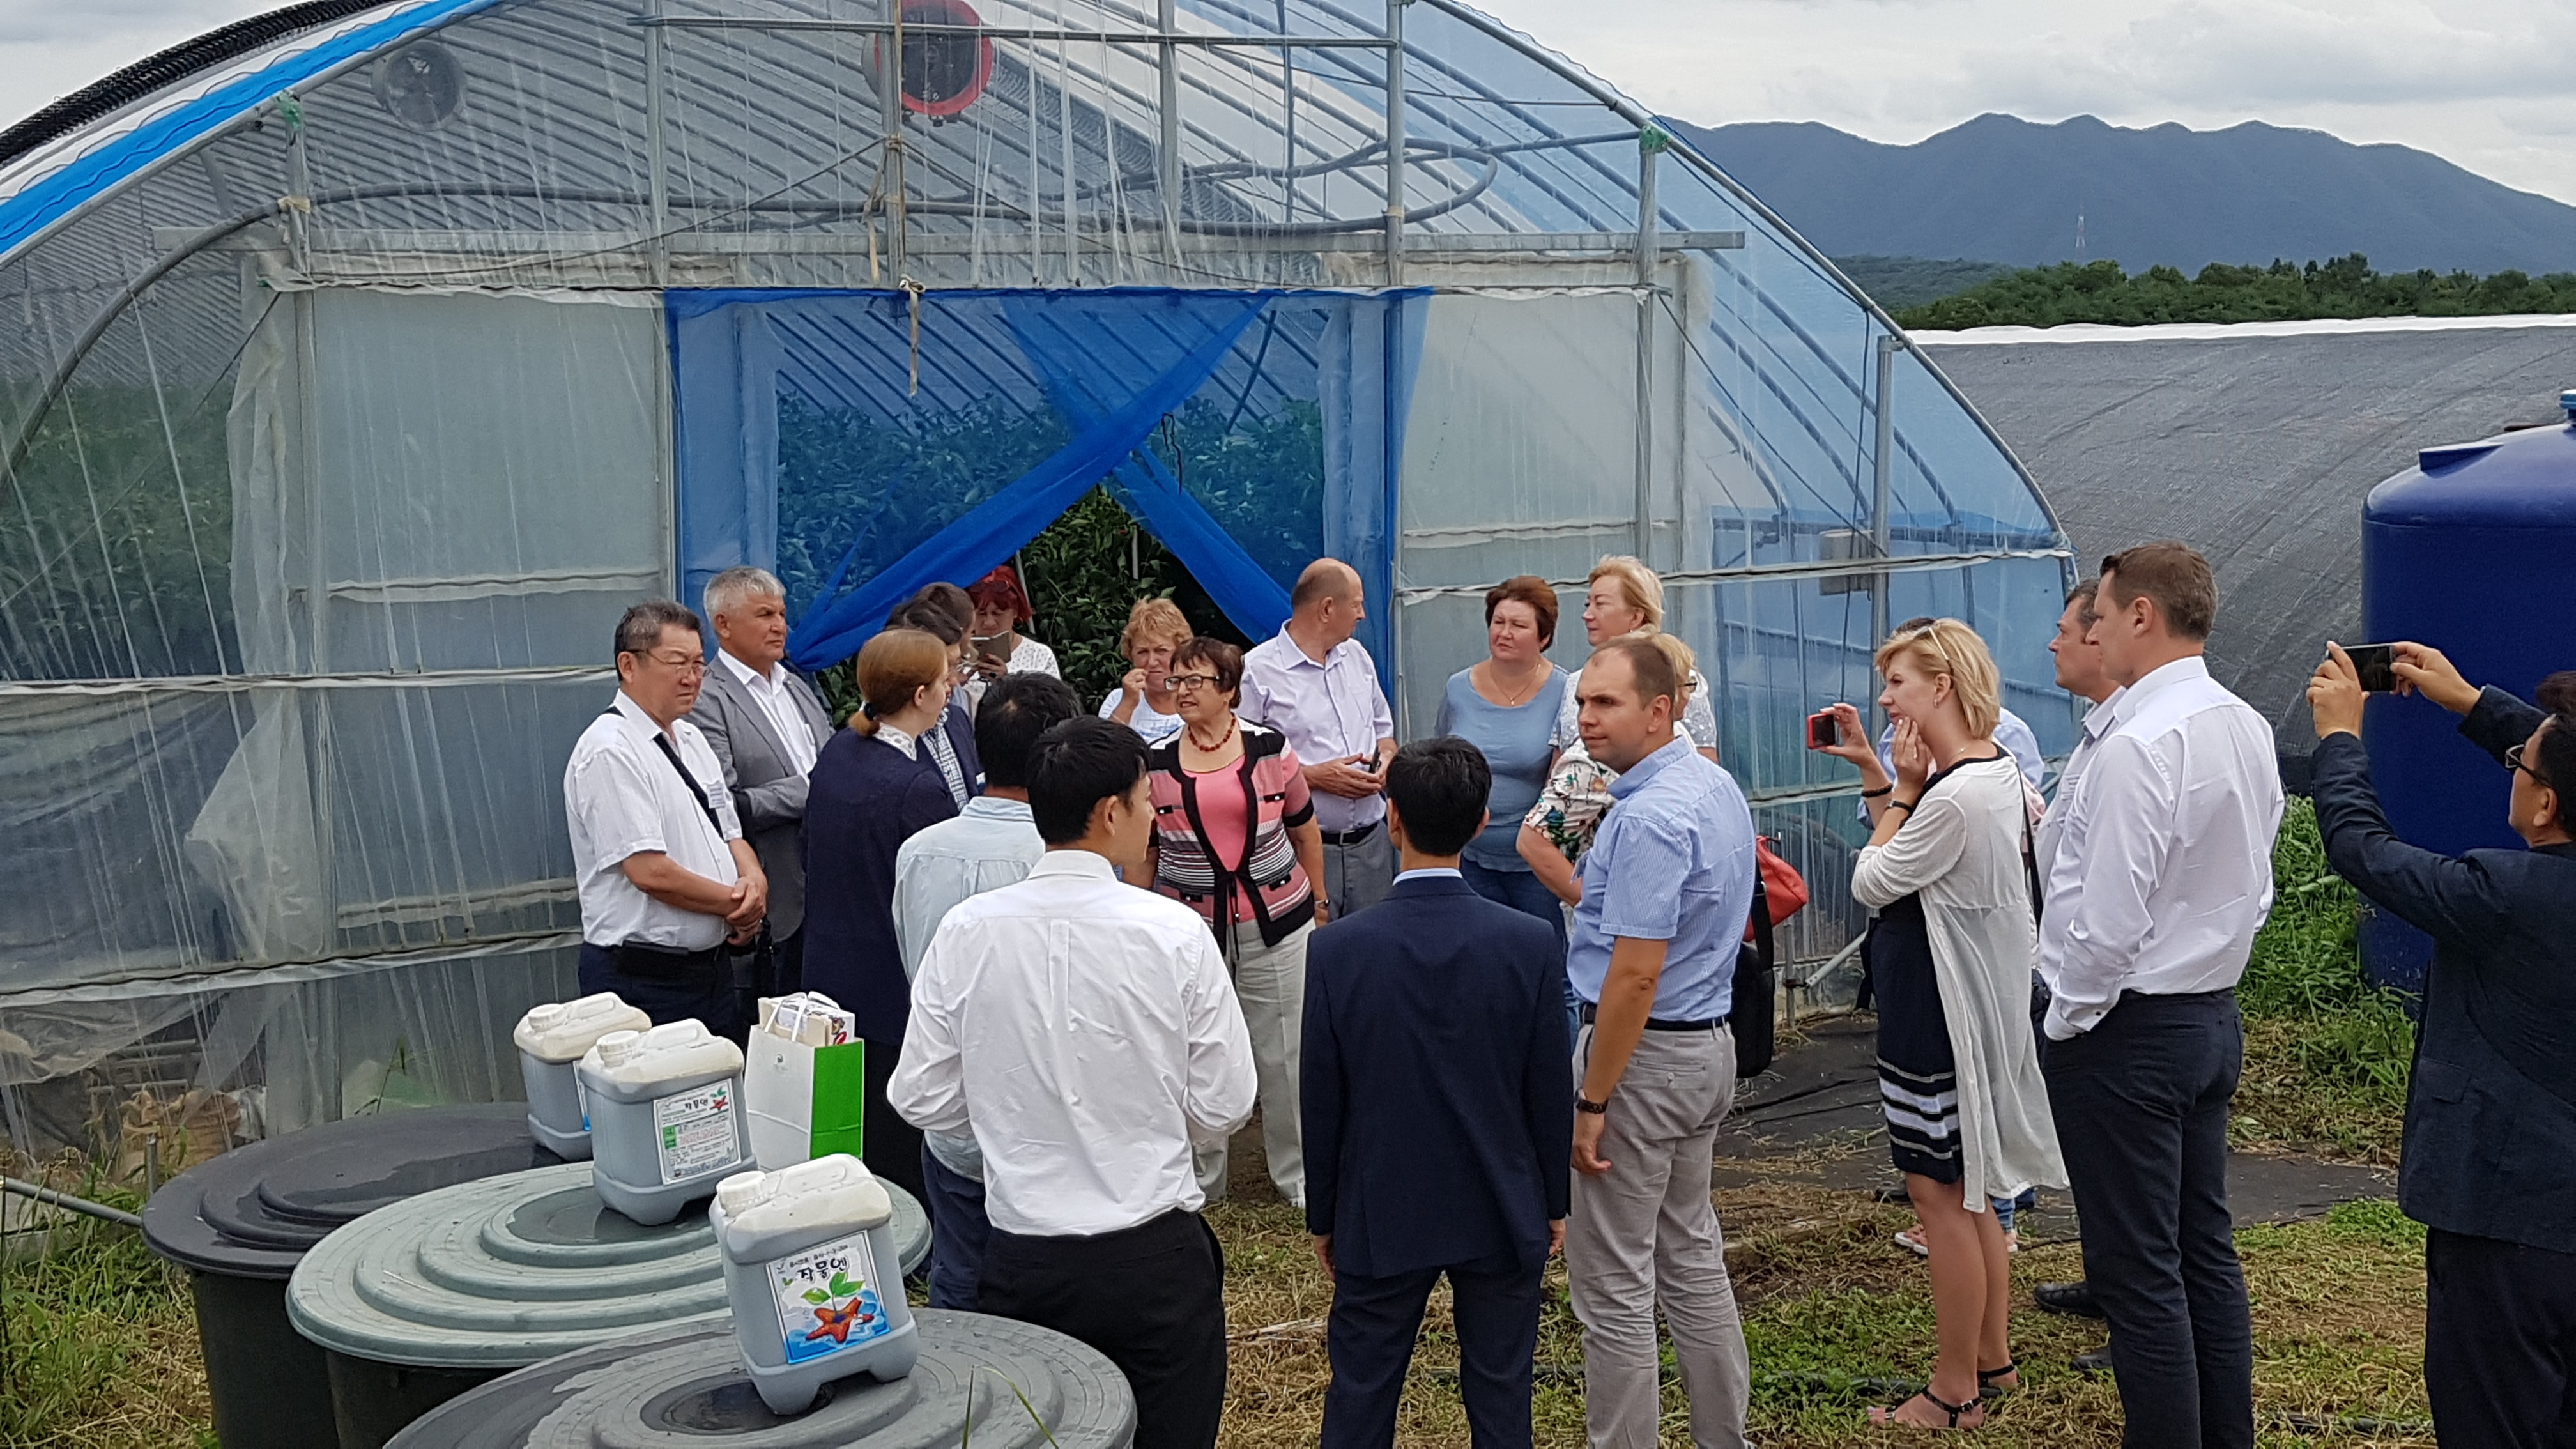 A delegation from Russia keen interested in the Agriculture Center system